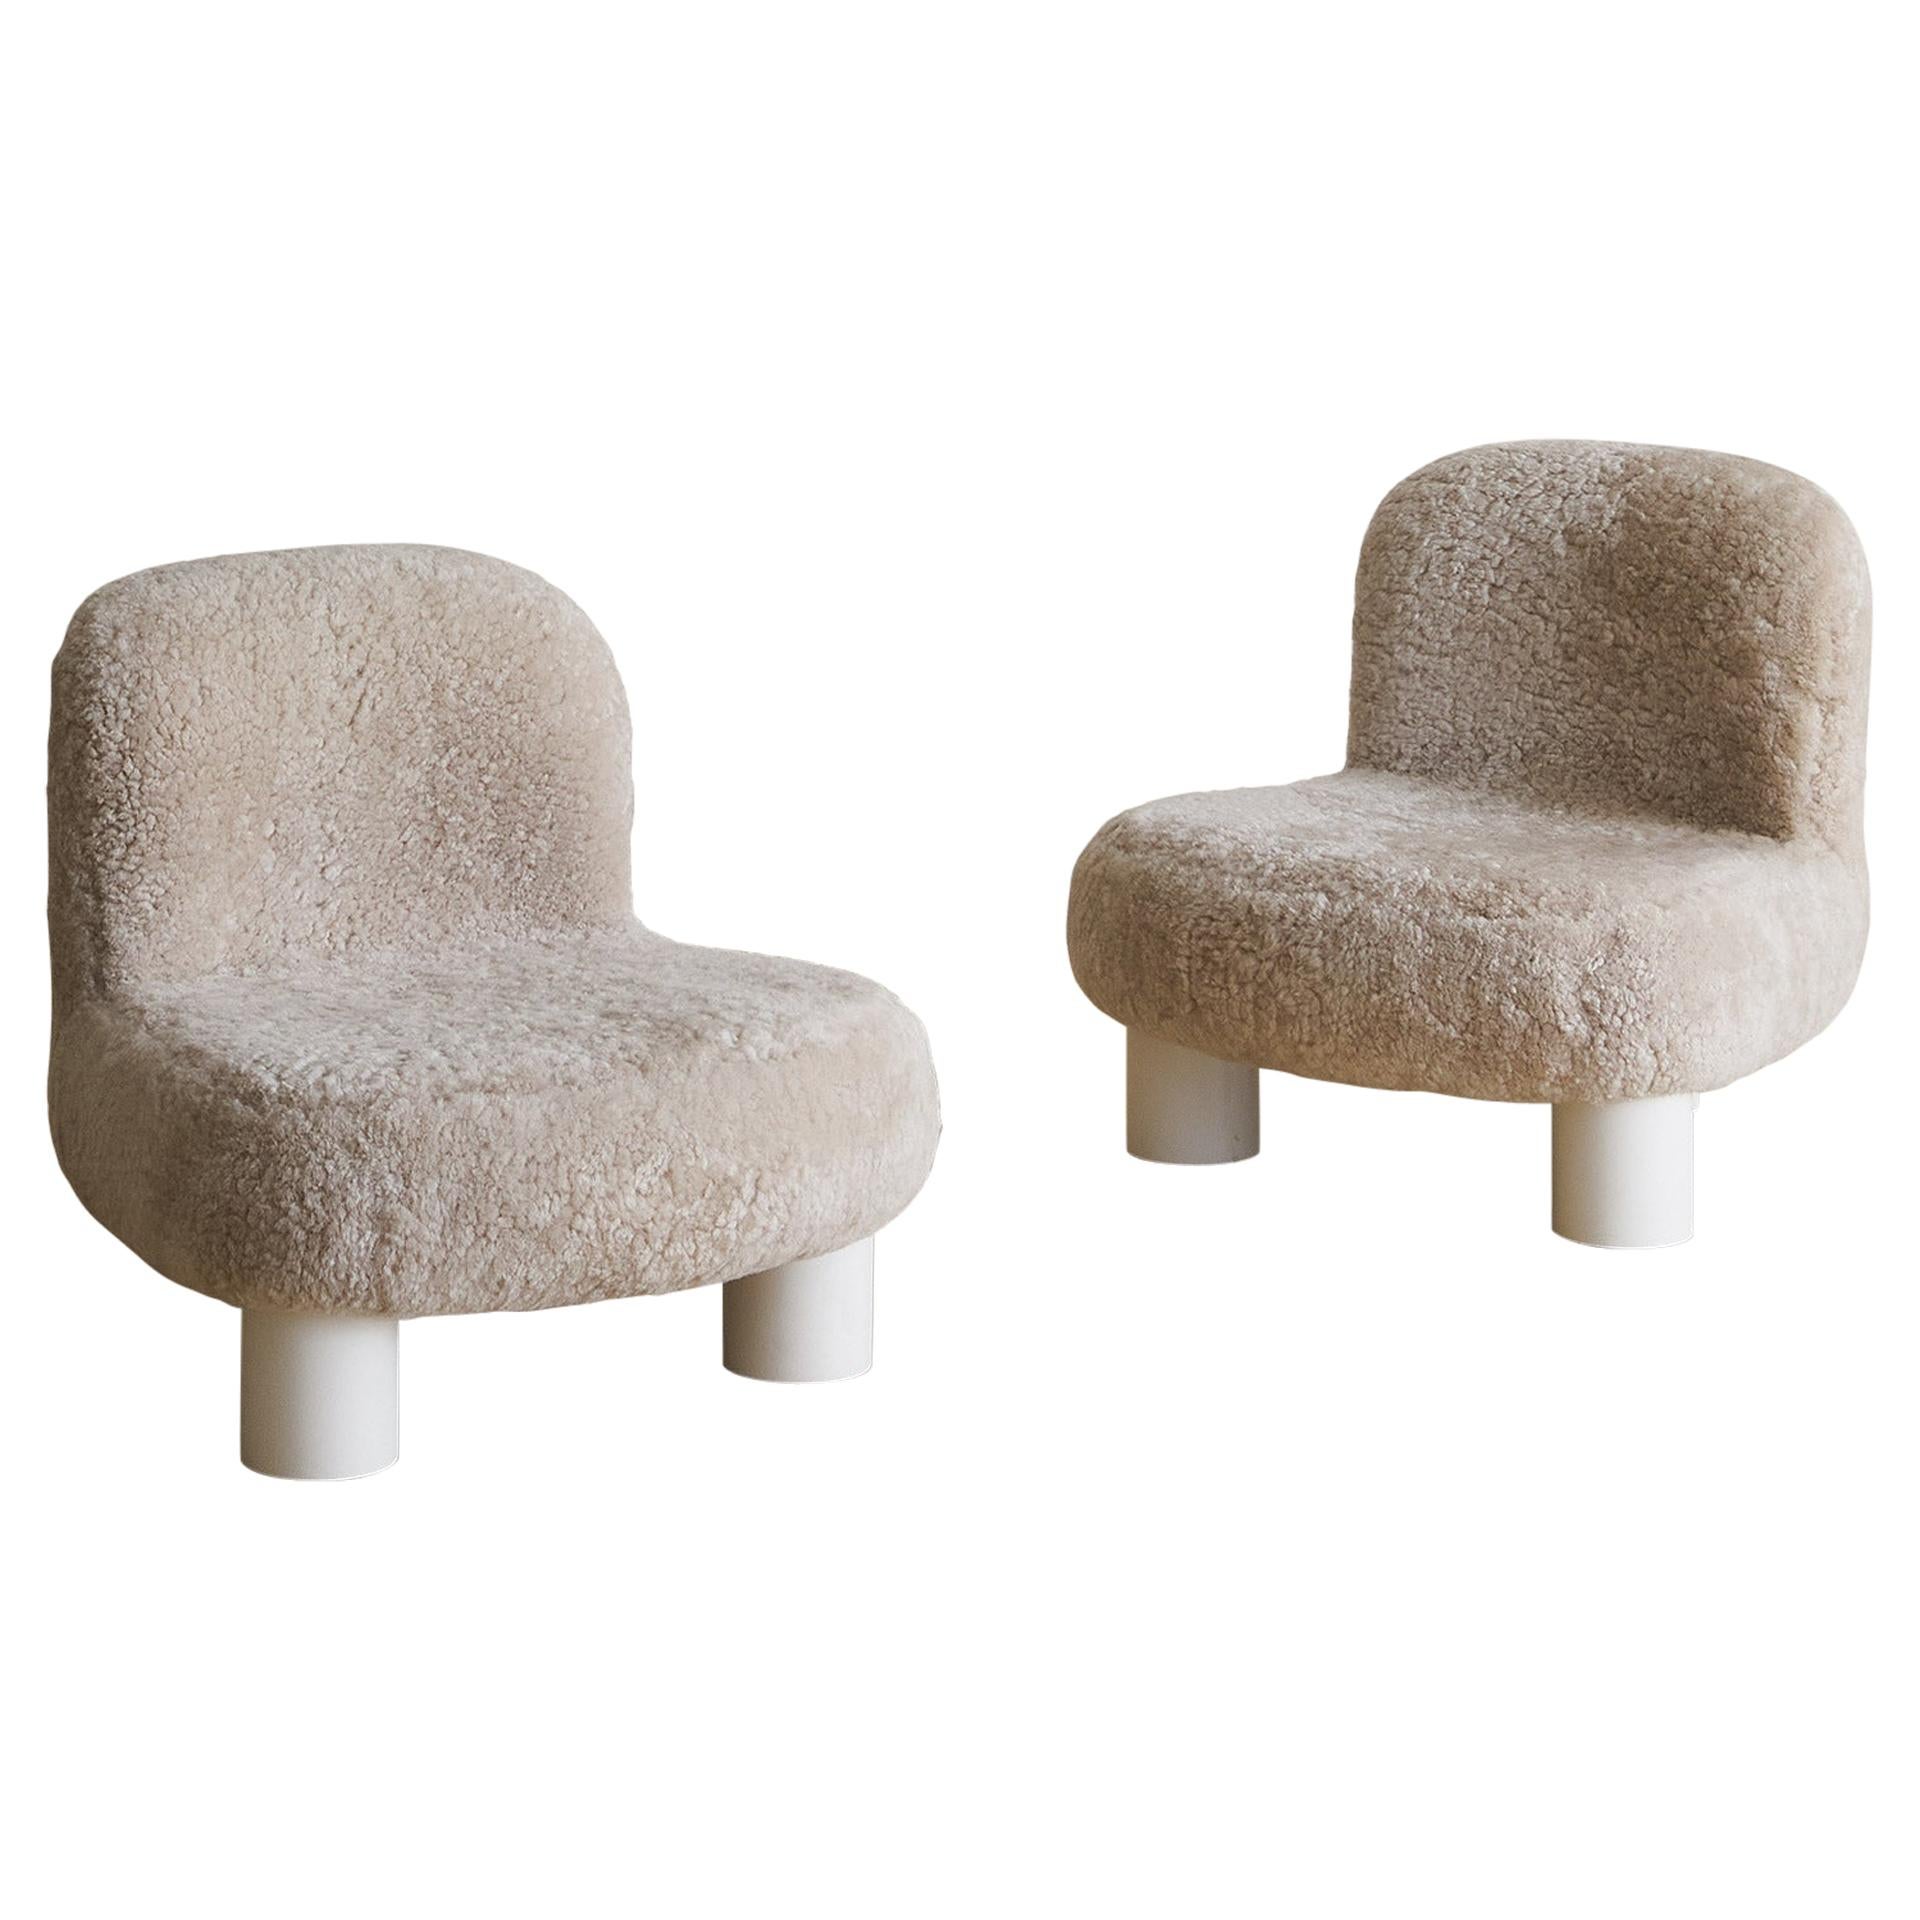 Pair of Botolo Chairs by Cini Boeri for Arflex in Shearling